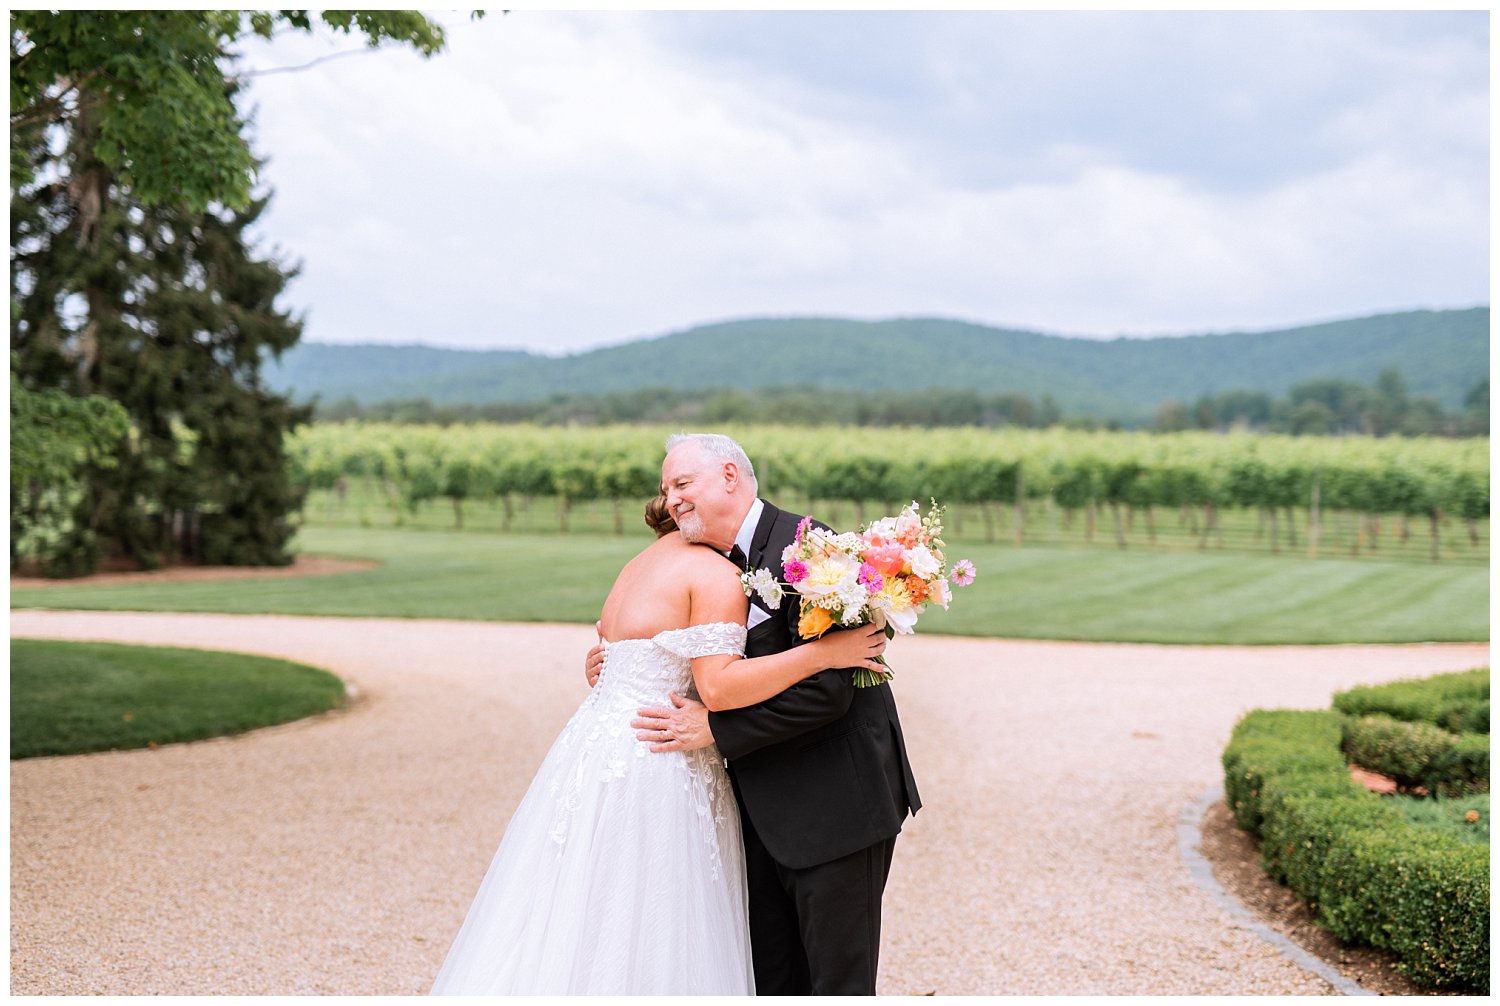 First look between bride and her father for this Virginia vineyard wedding